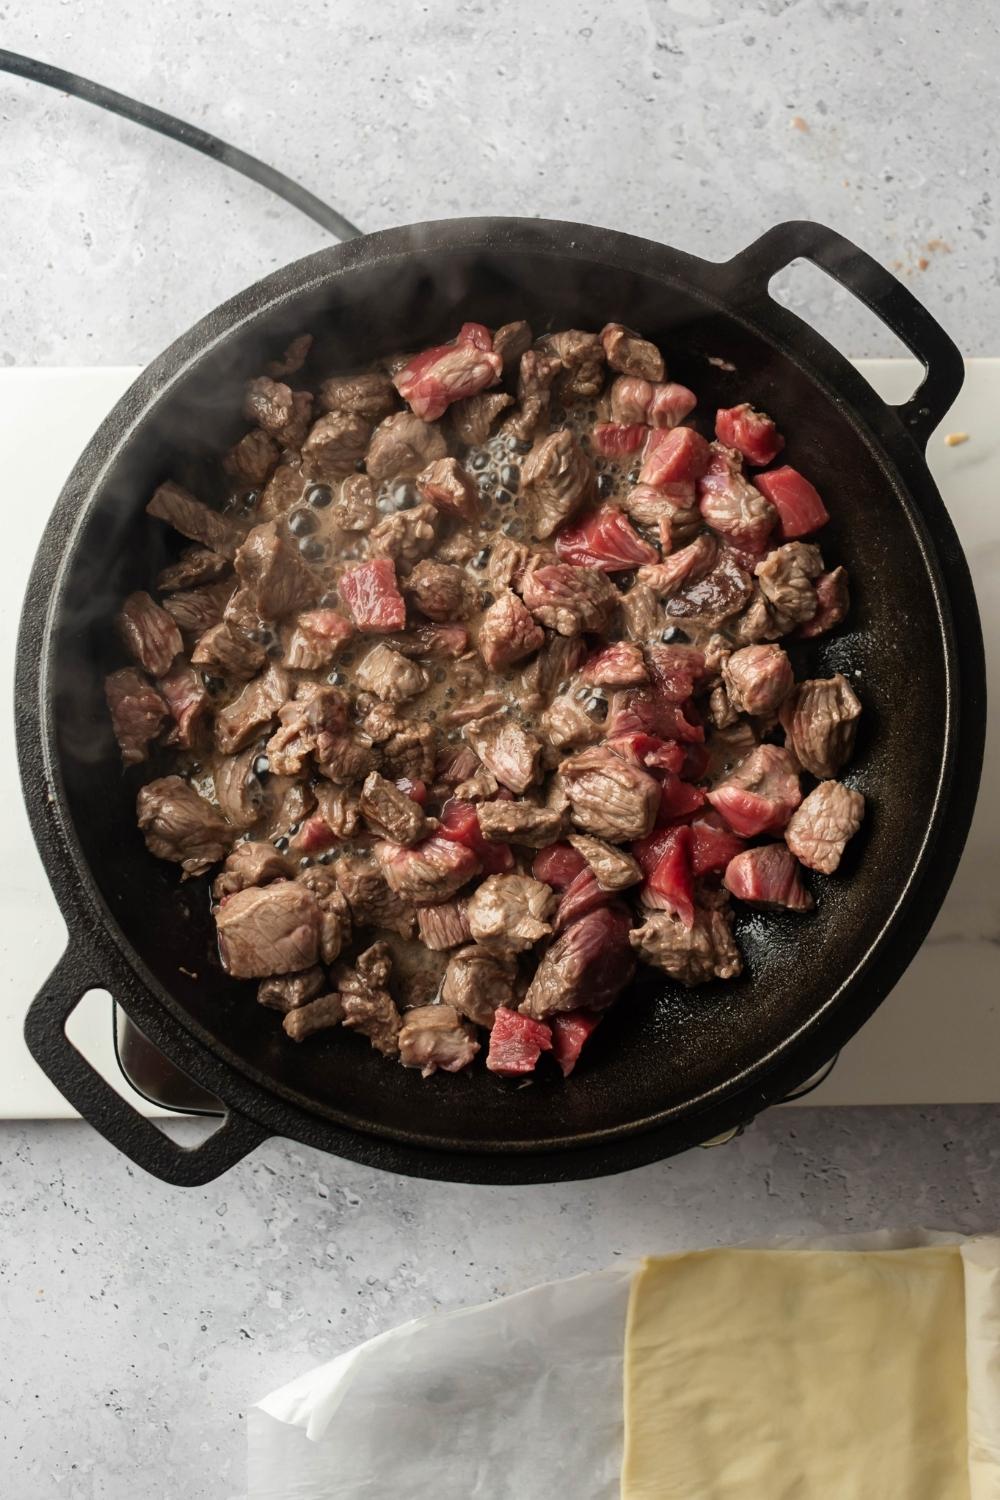 An overhead view of beef chunks being cooked in an iron pot.